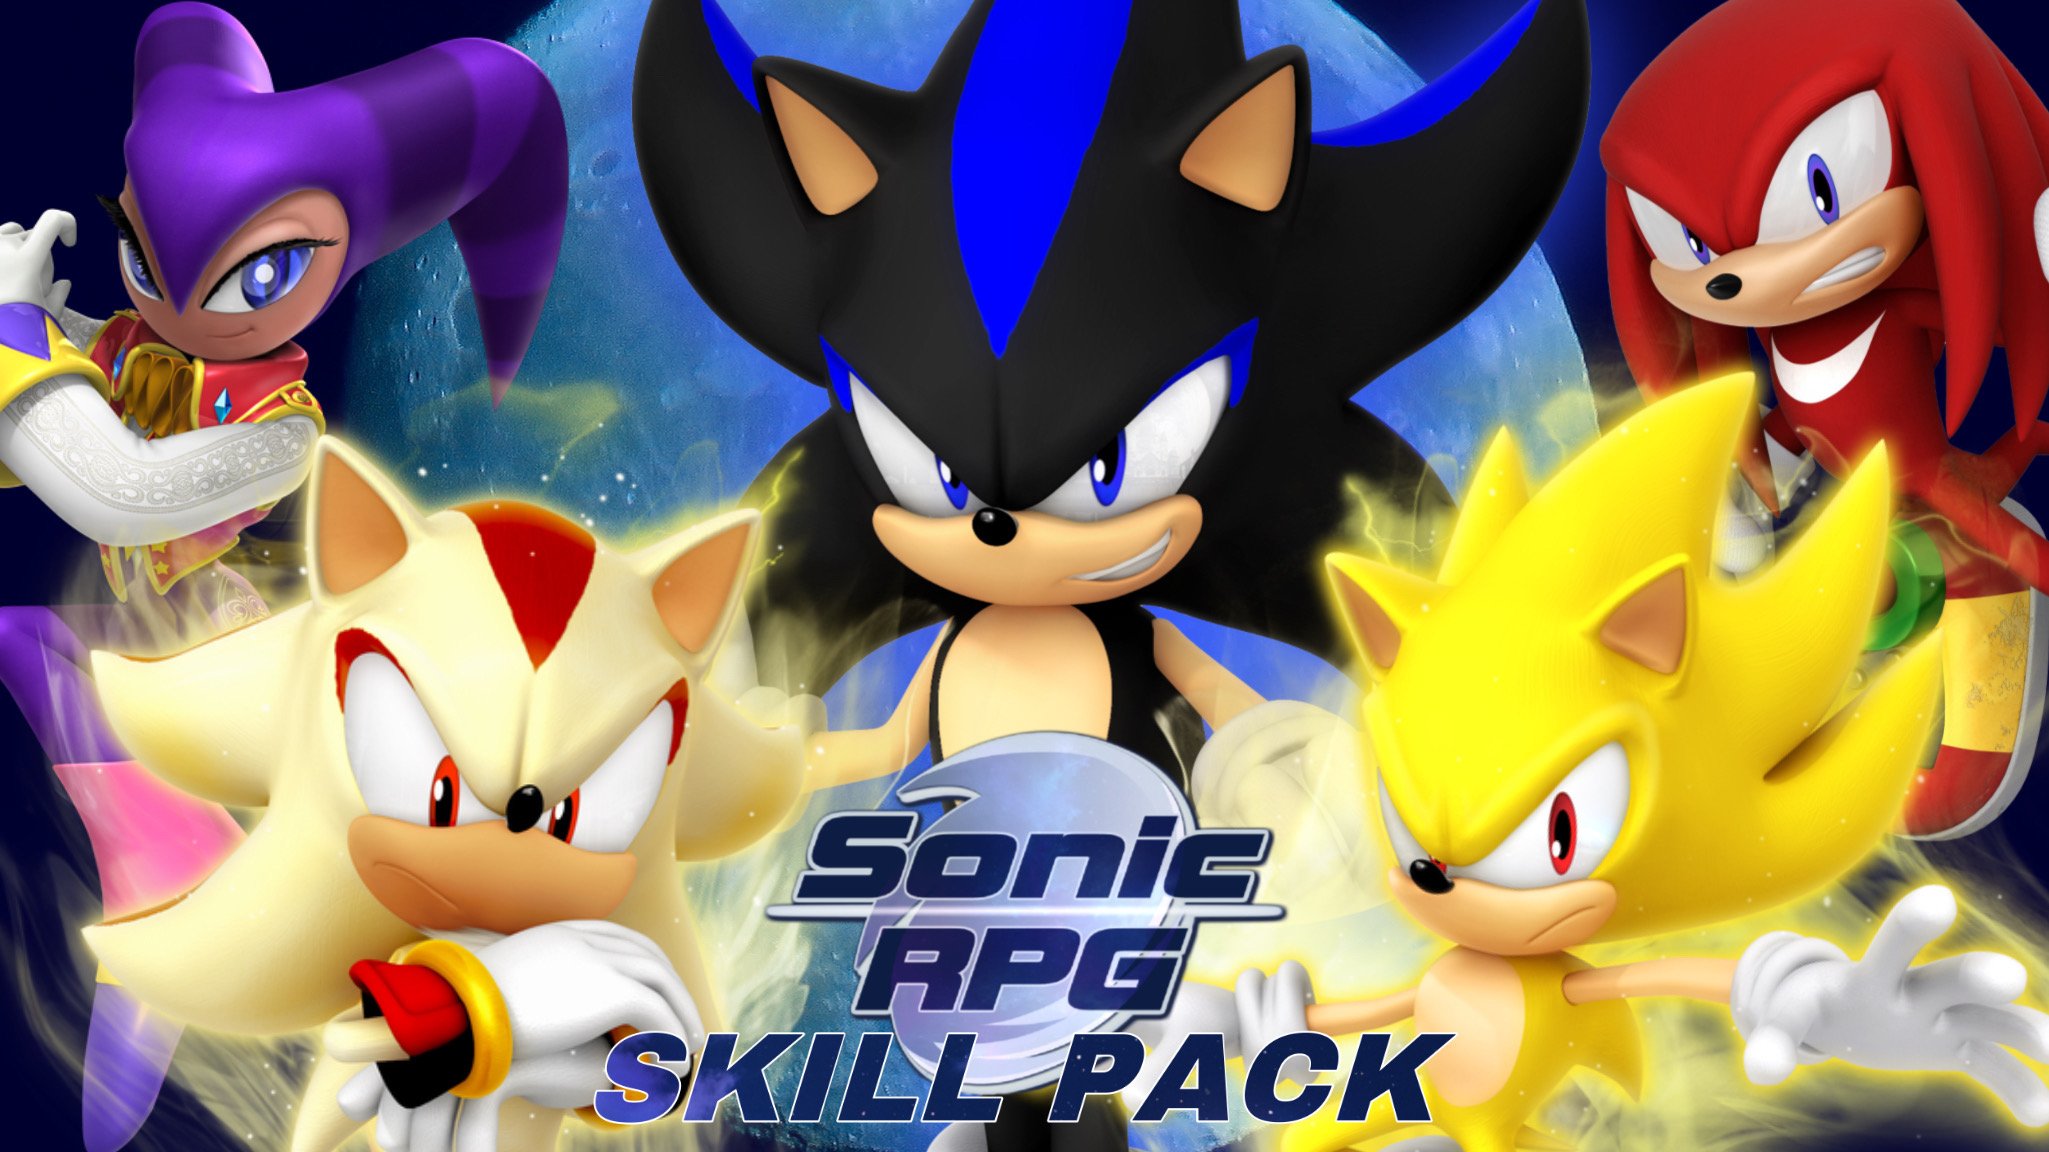 Sonic Frontiers music pack – Xenoverse Mods